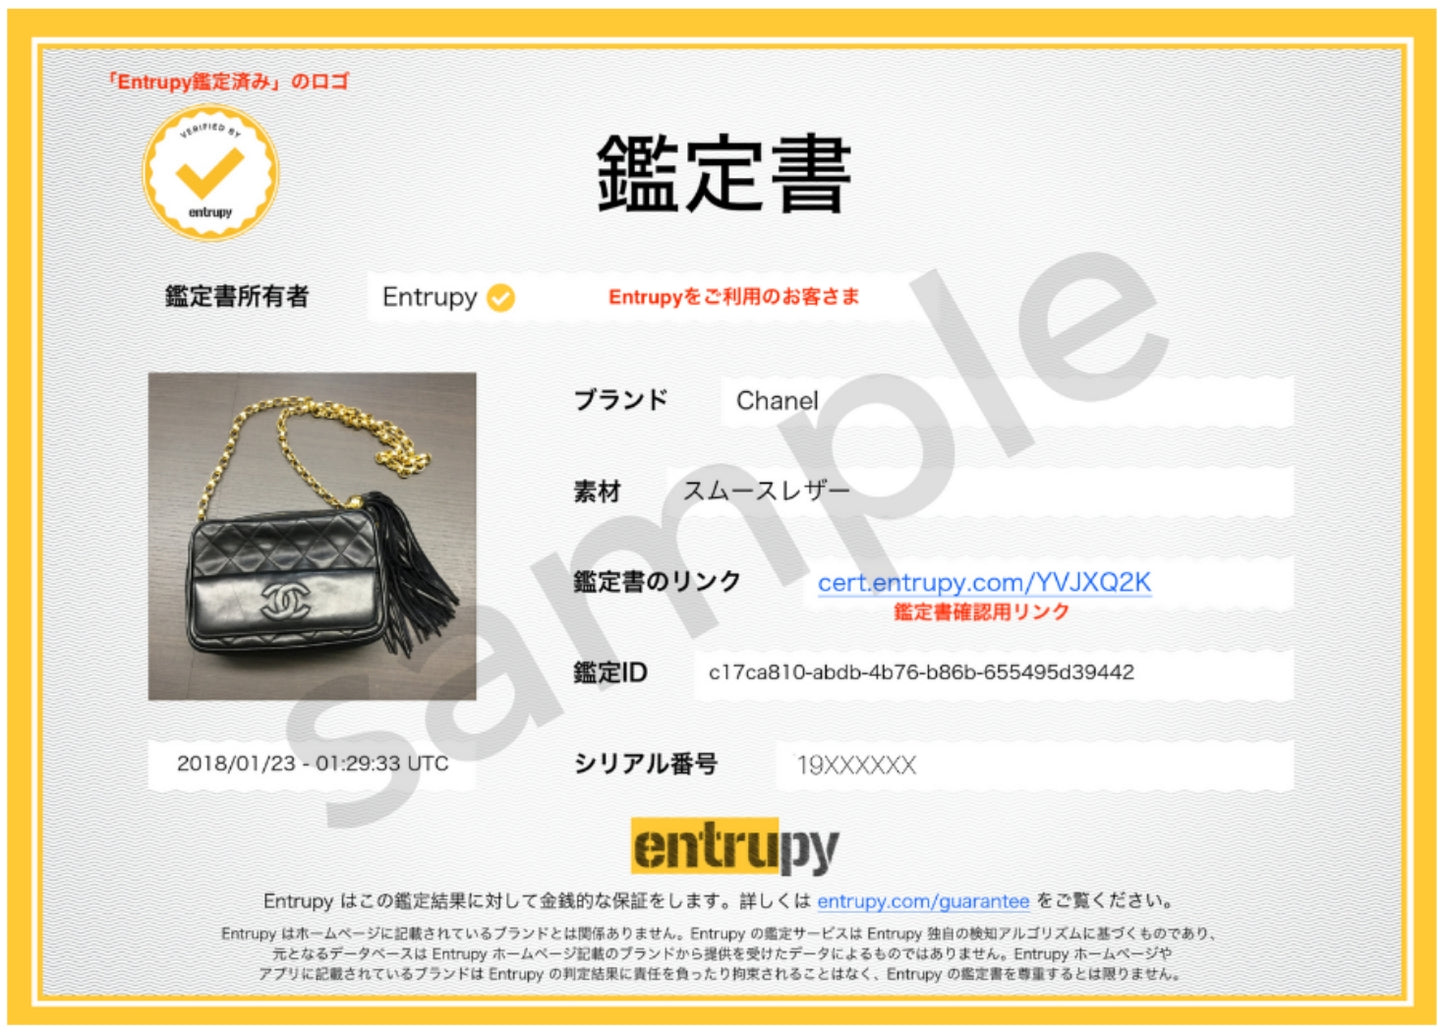 1 Certificate of Authentication with Entrupy